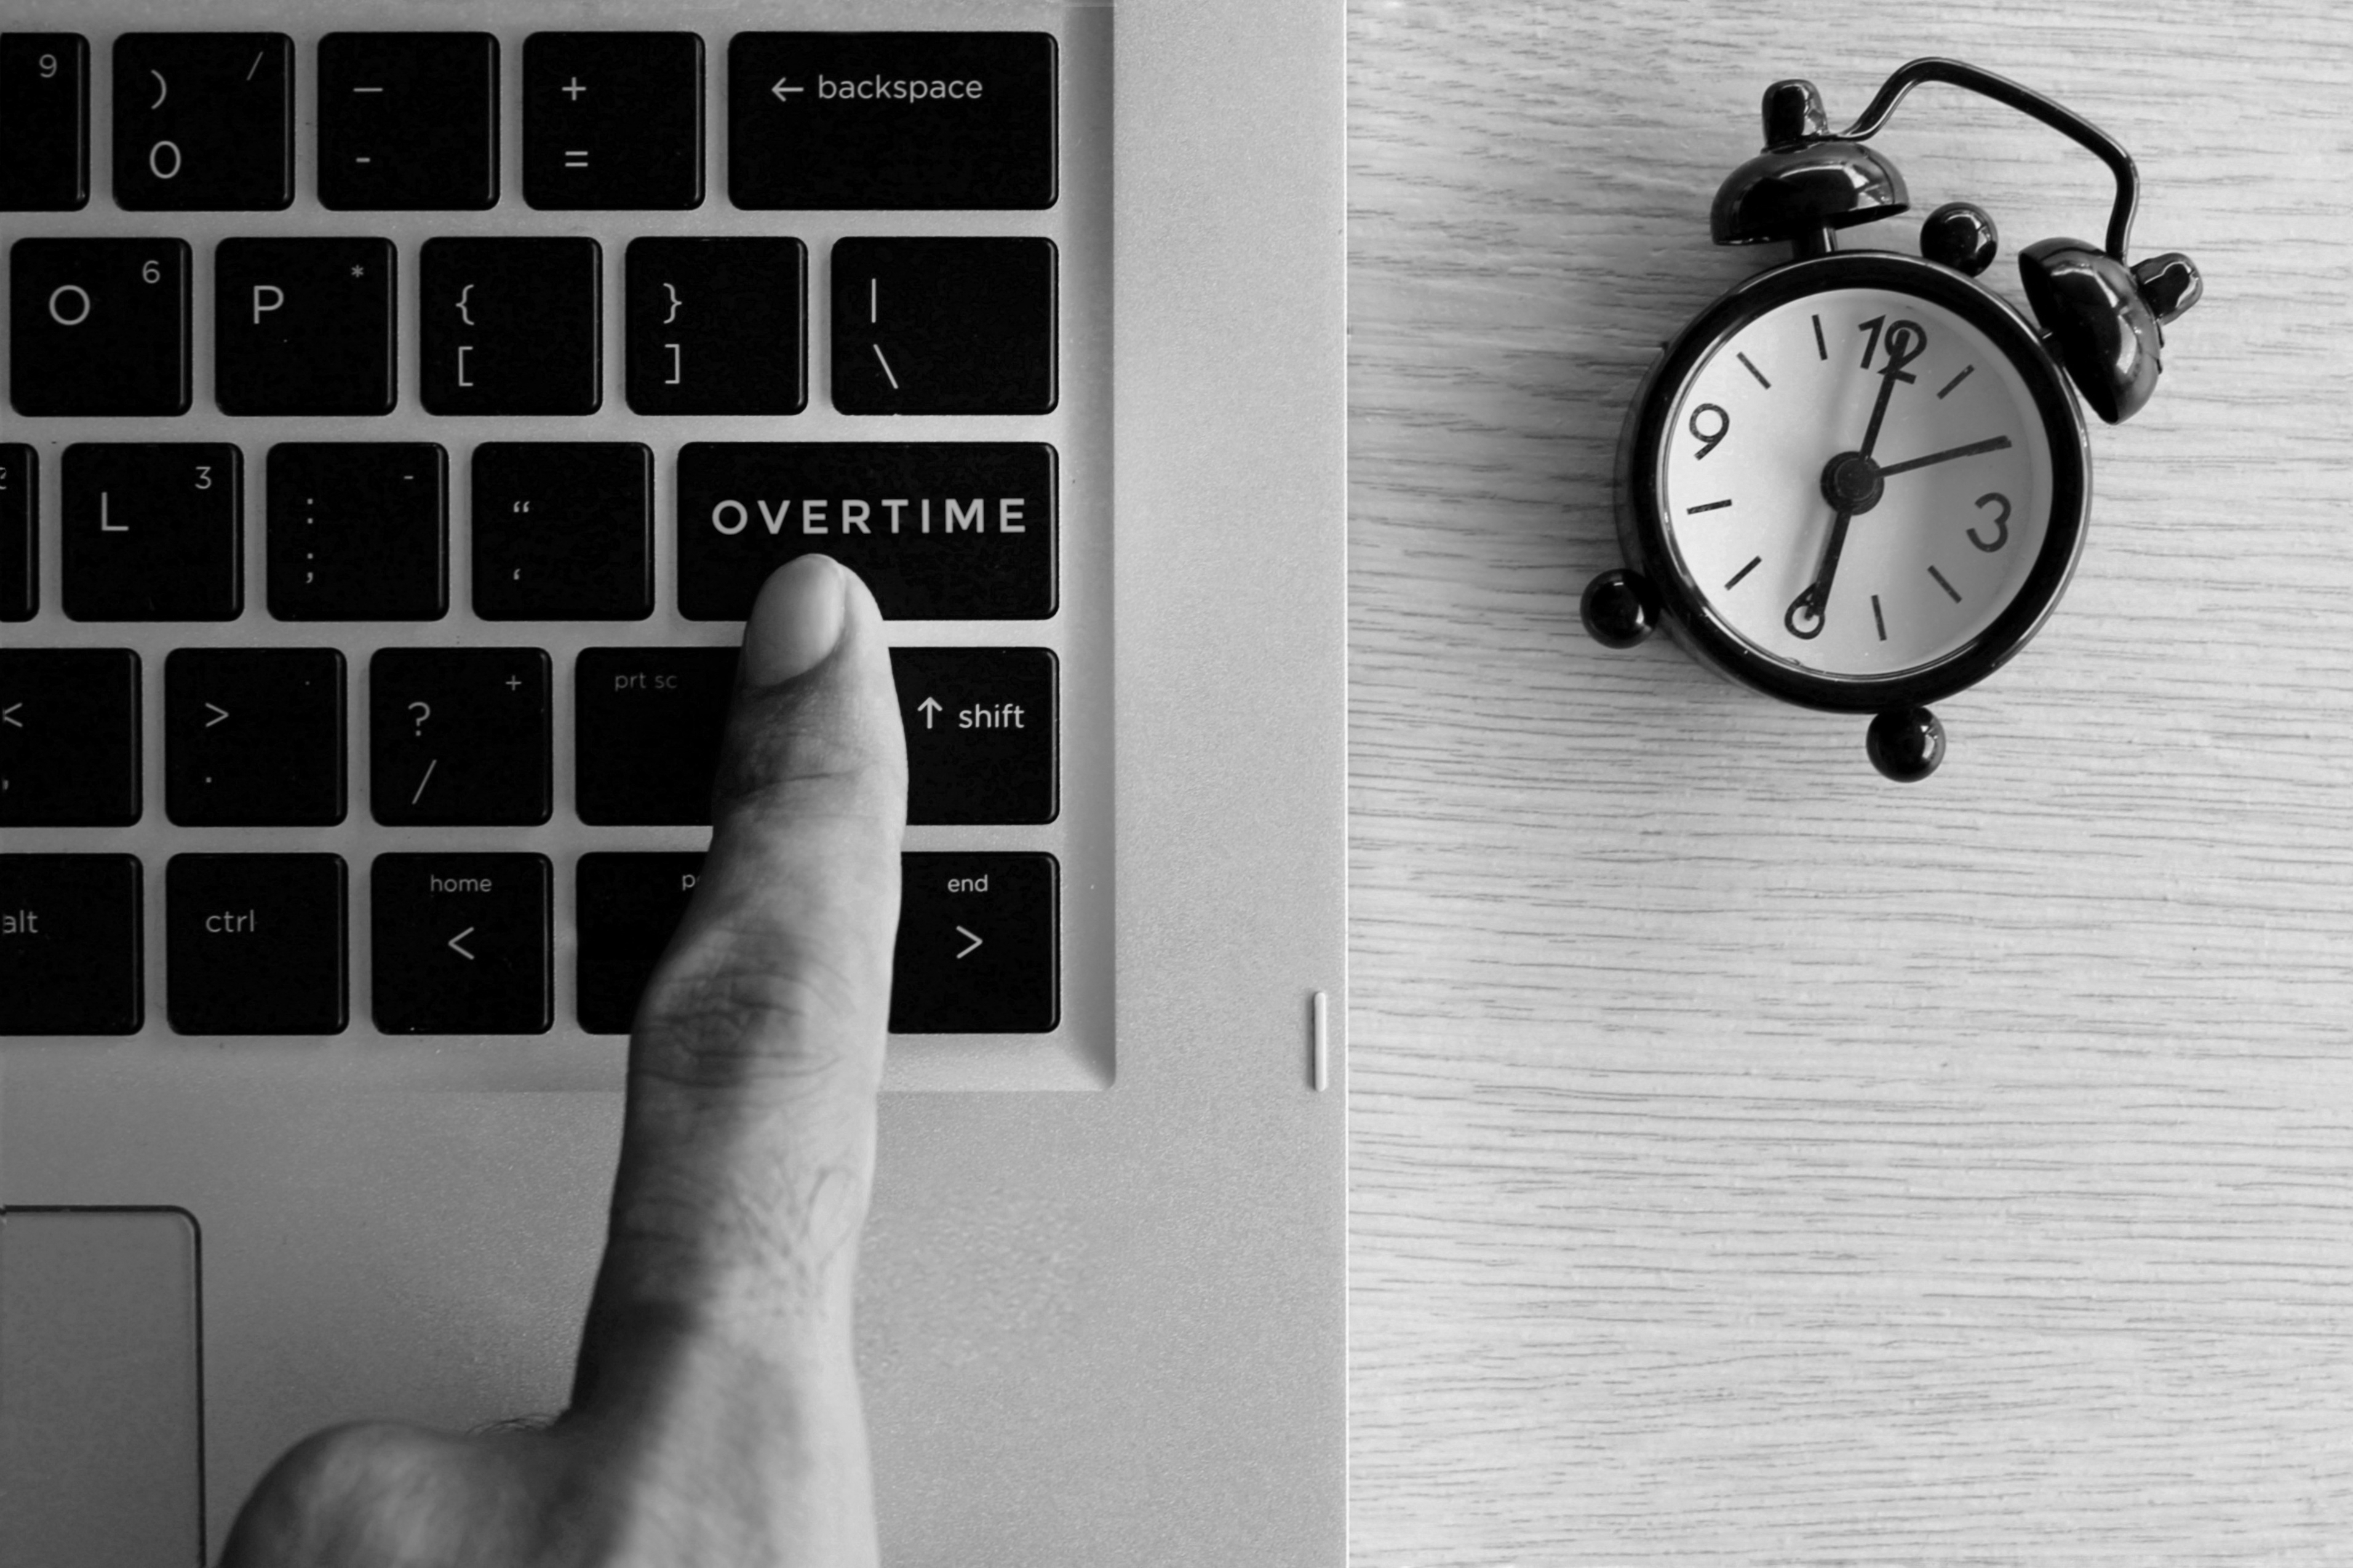 A finger pointing at a keyboard that says overtime with an alarm clock next to it.